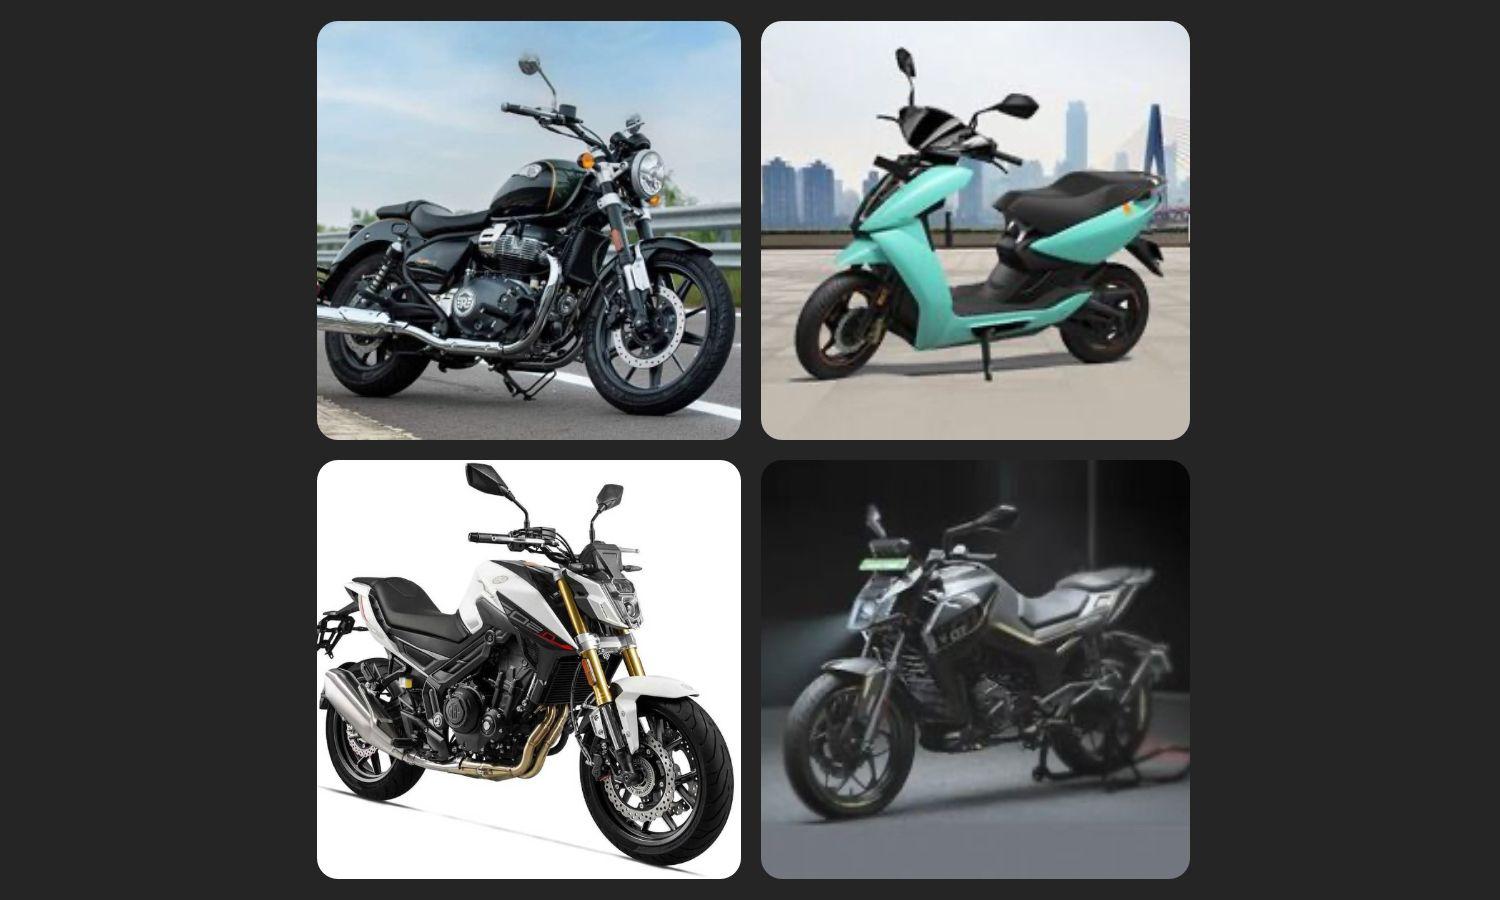 Two-Wheeler Launches In January 2023: RE Super Meteor 650, A Host Of EVs, & More